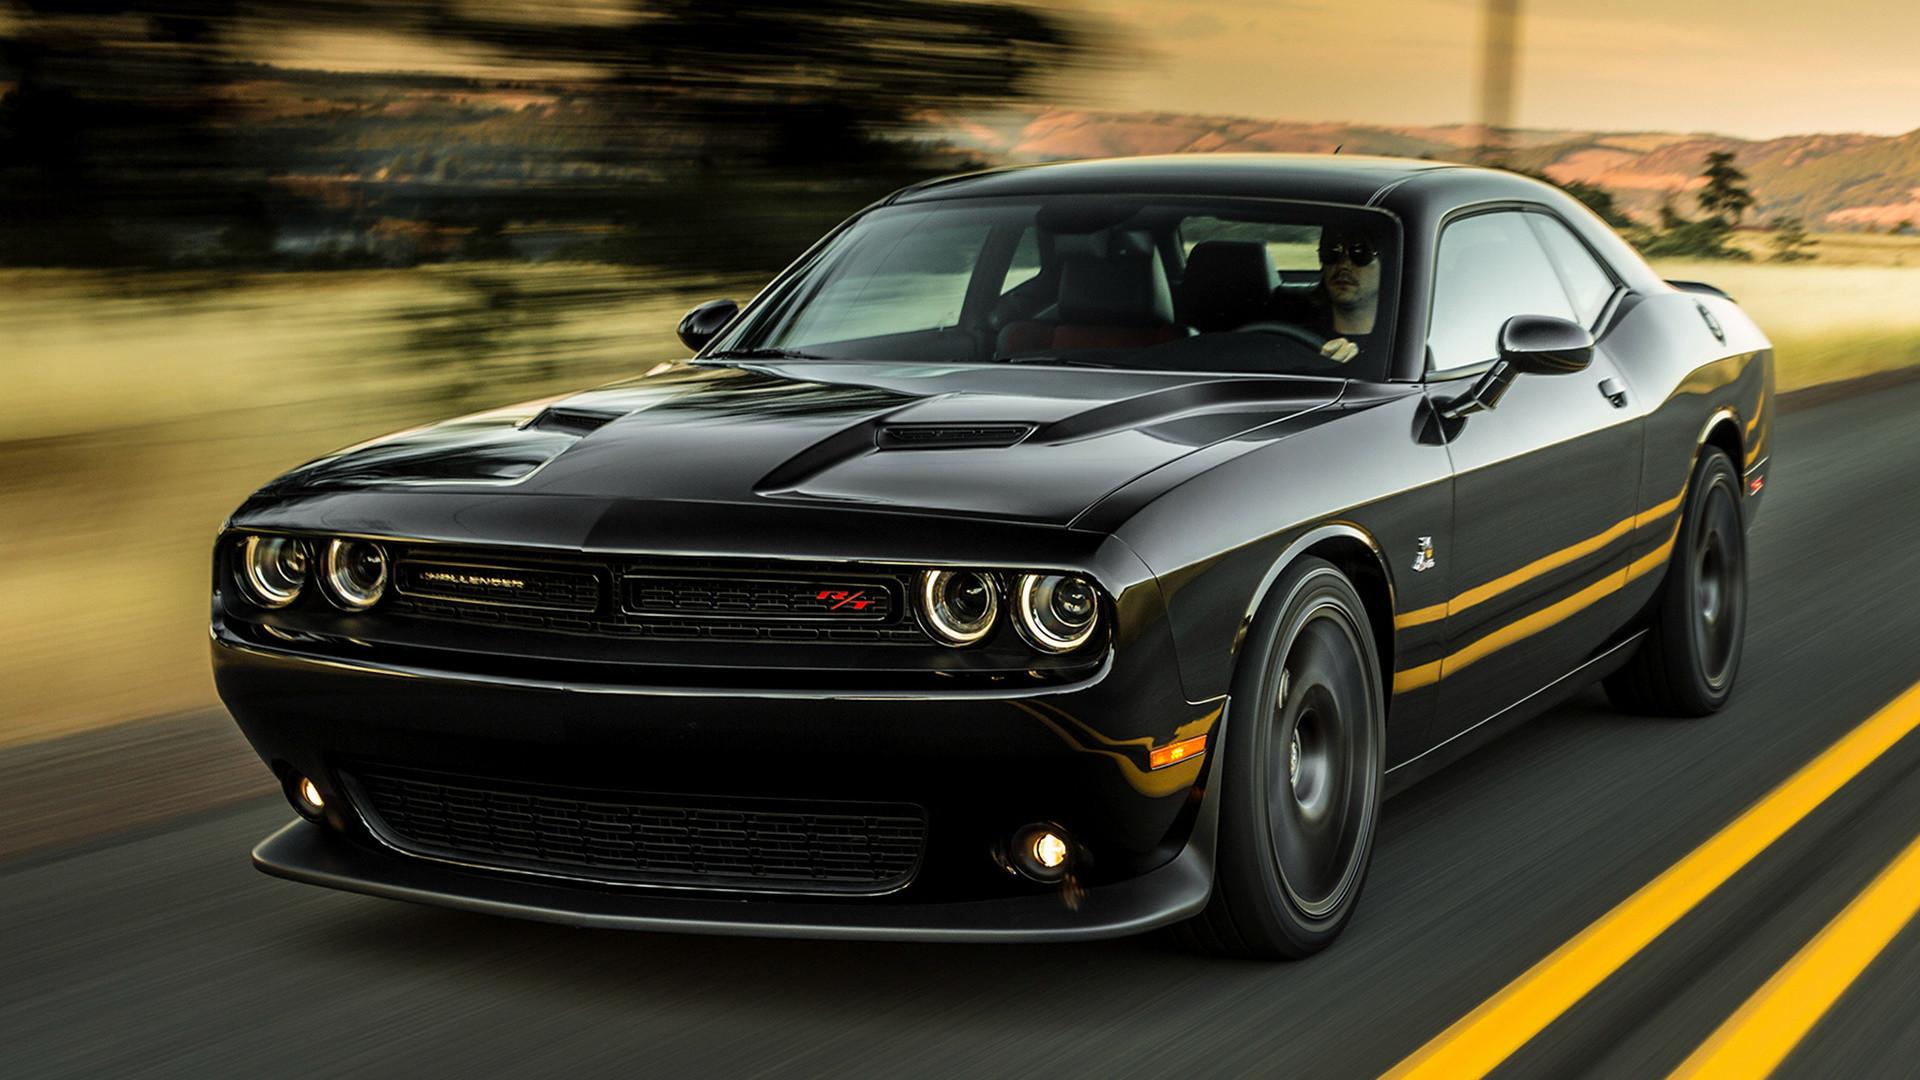 Download wallpaper 1280x2120 black muscle car dodge challenger iphone 6  plus 1280x2120 hd background 19279